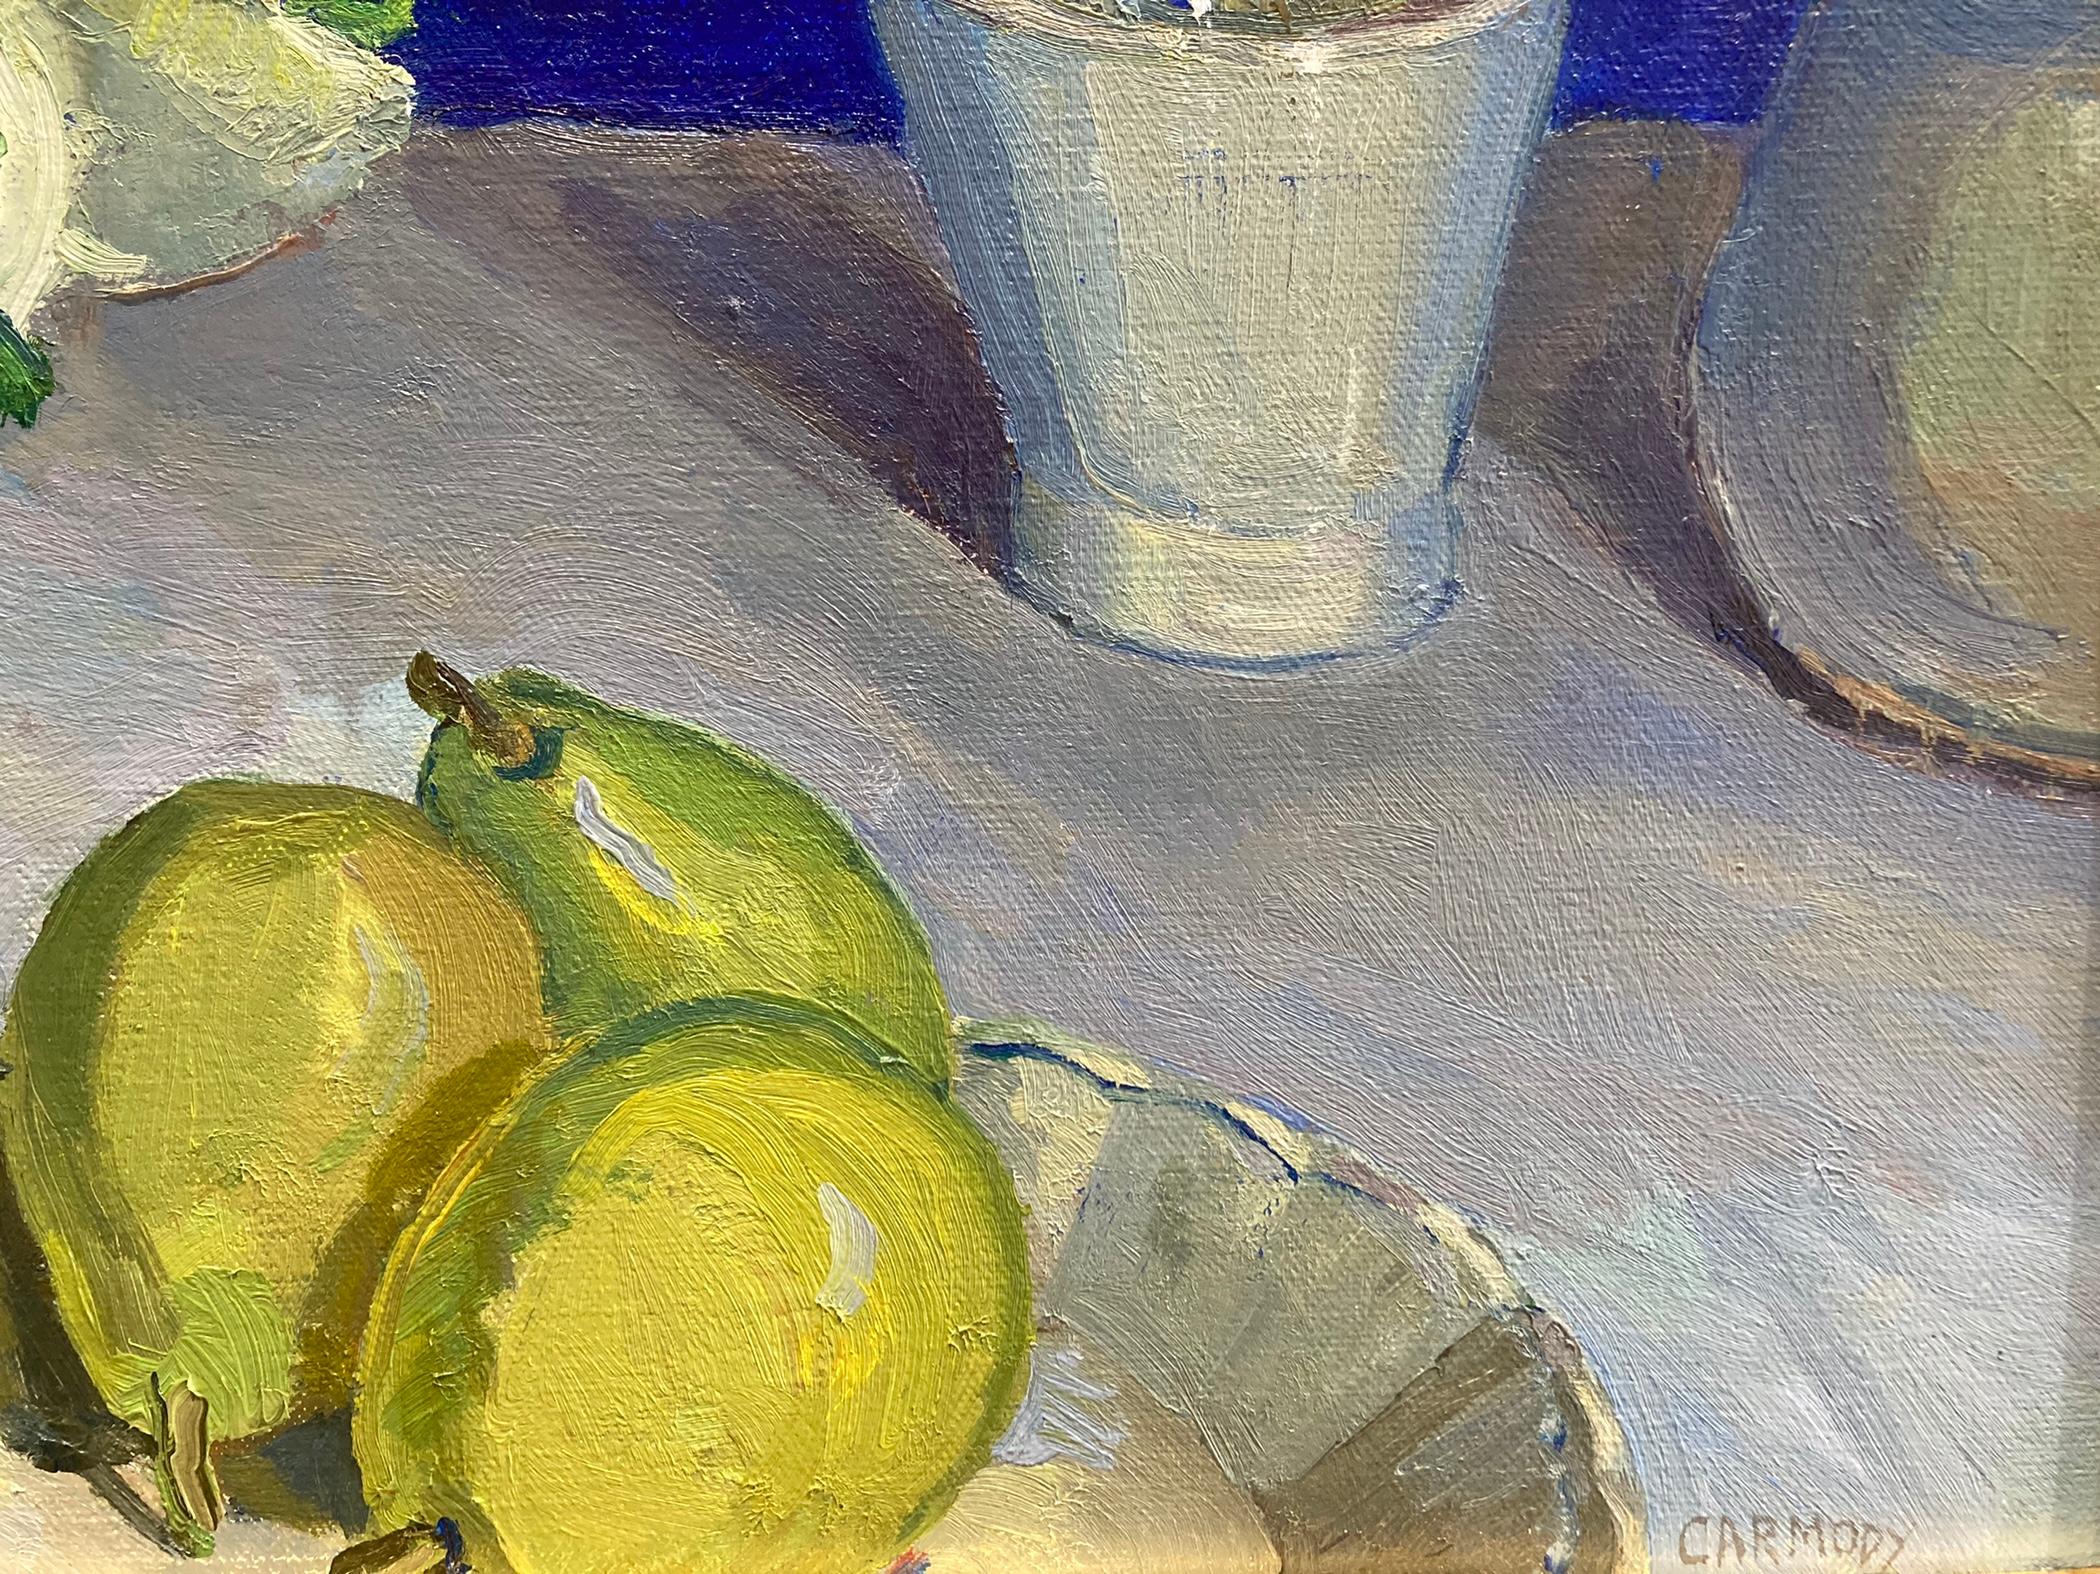 A still life painting of flowers on a table. On a white table, a blue and white pitcher holds white blooms. Around the pitcher on the table are a speckled napkin with a knife laying over the top to the left, a dish of spring green pears in the front